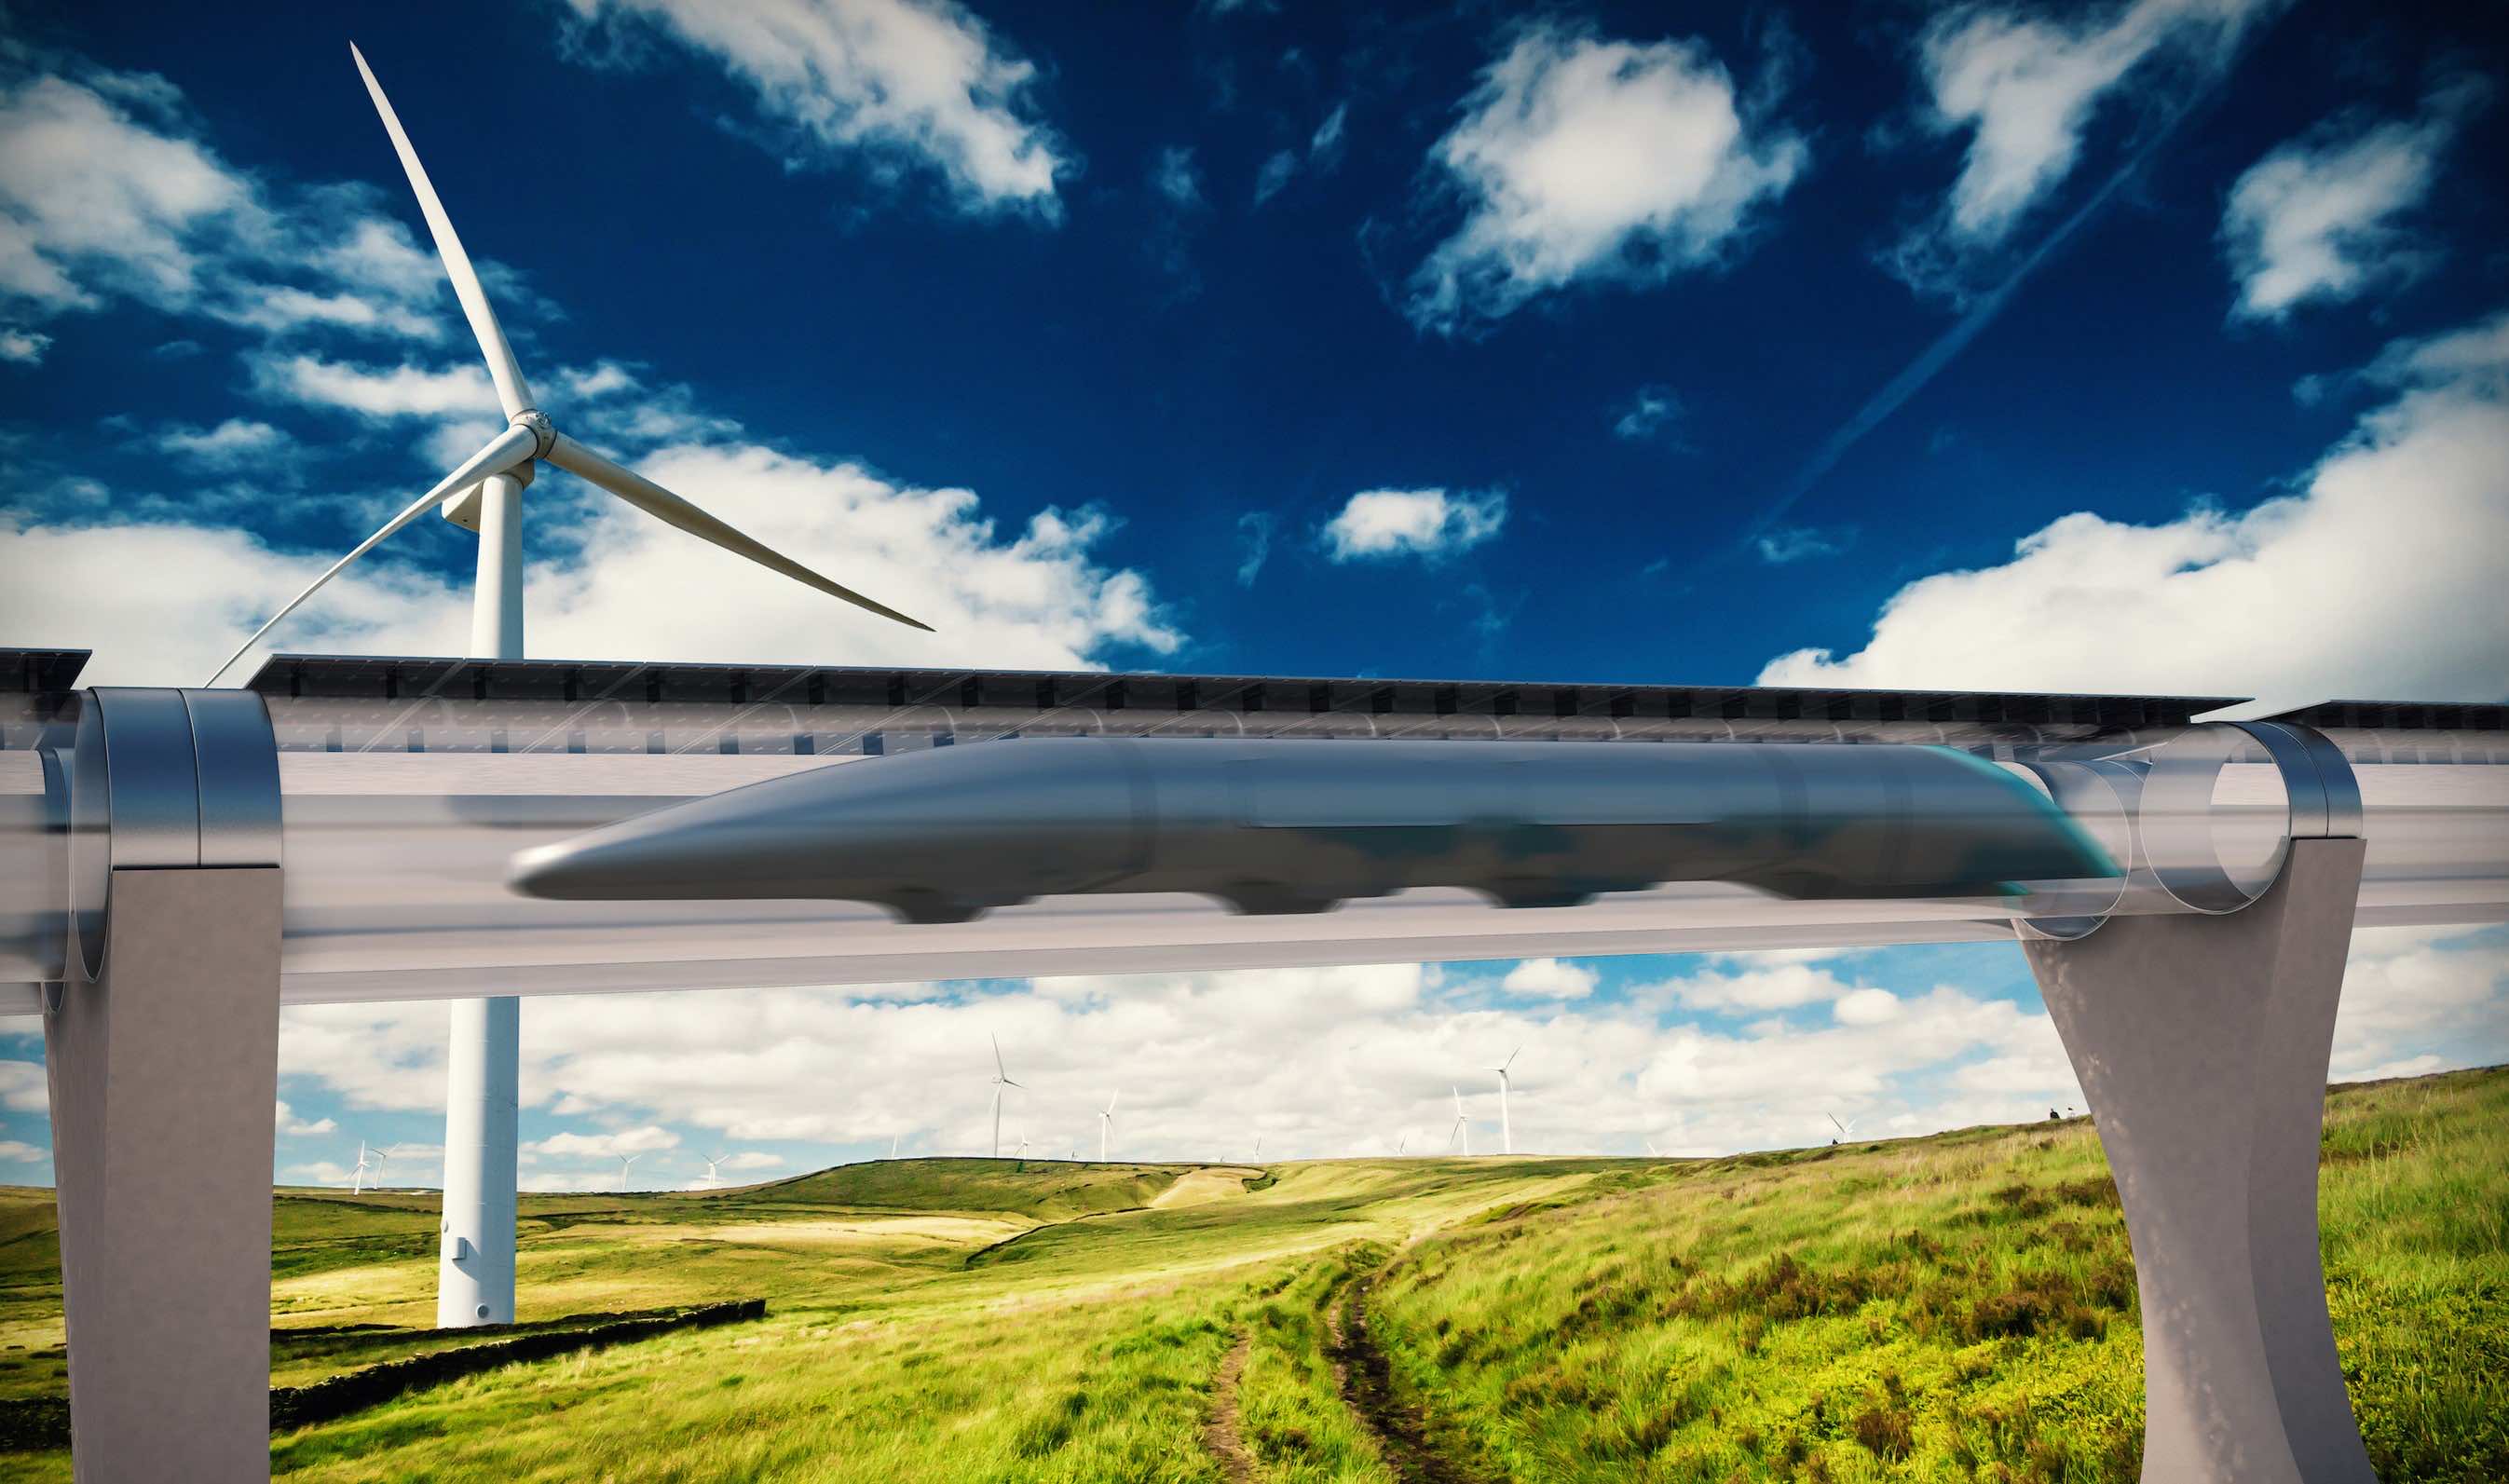 The Inconceivable Idea Of A Hyperloop Being Brought To Reality_Image 6